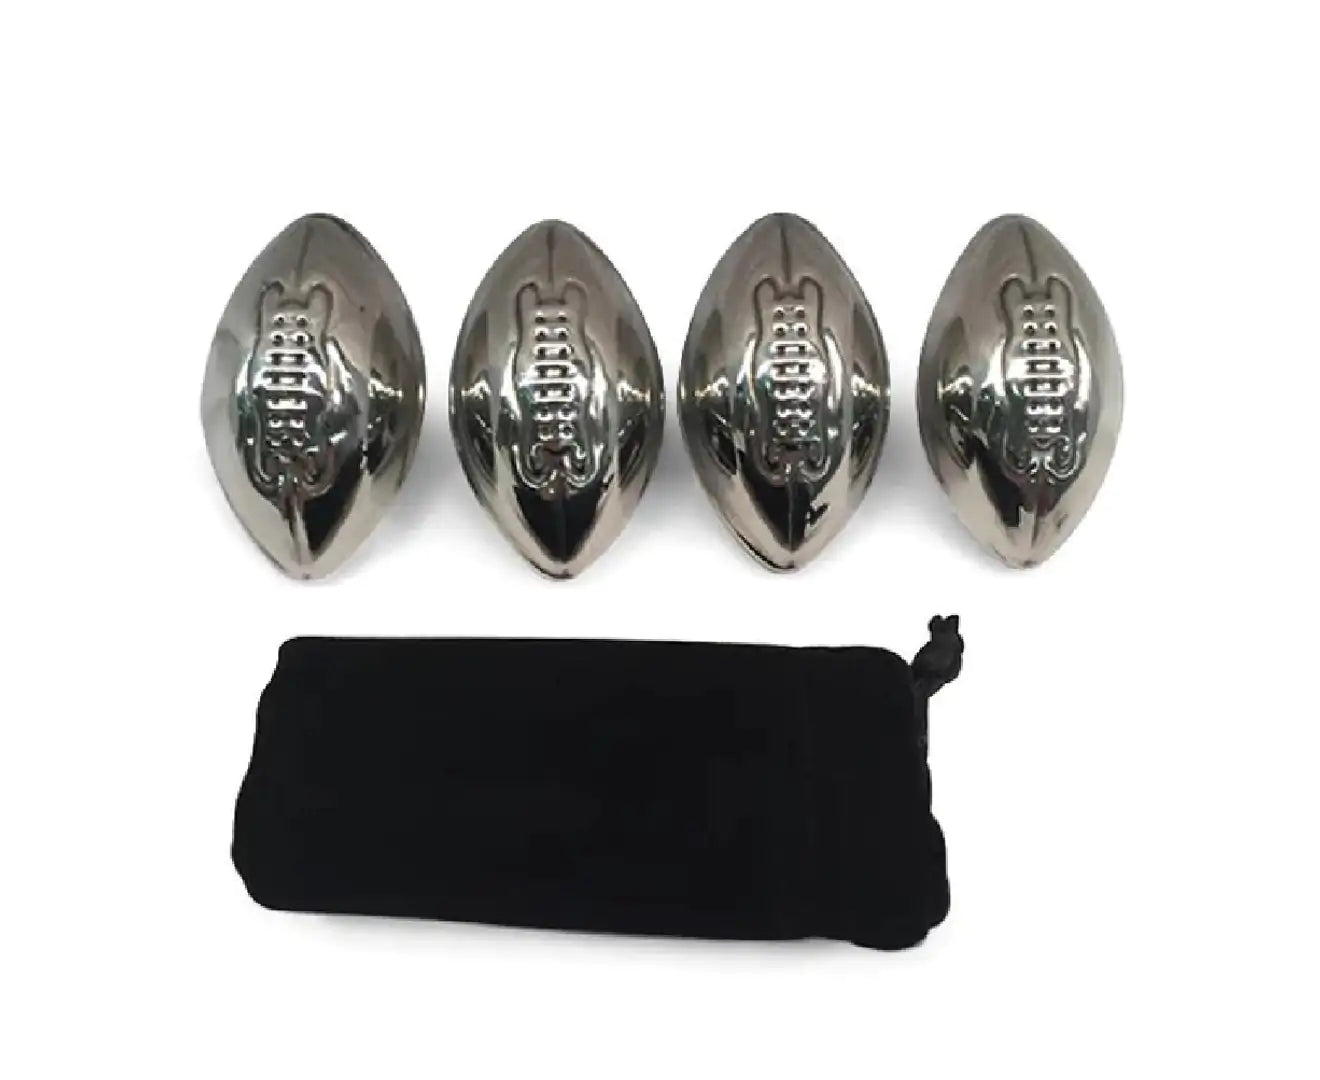 Men's Republic - Stainless Steel Football Ice Cubes - Set Of 4